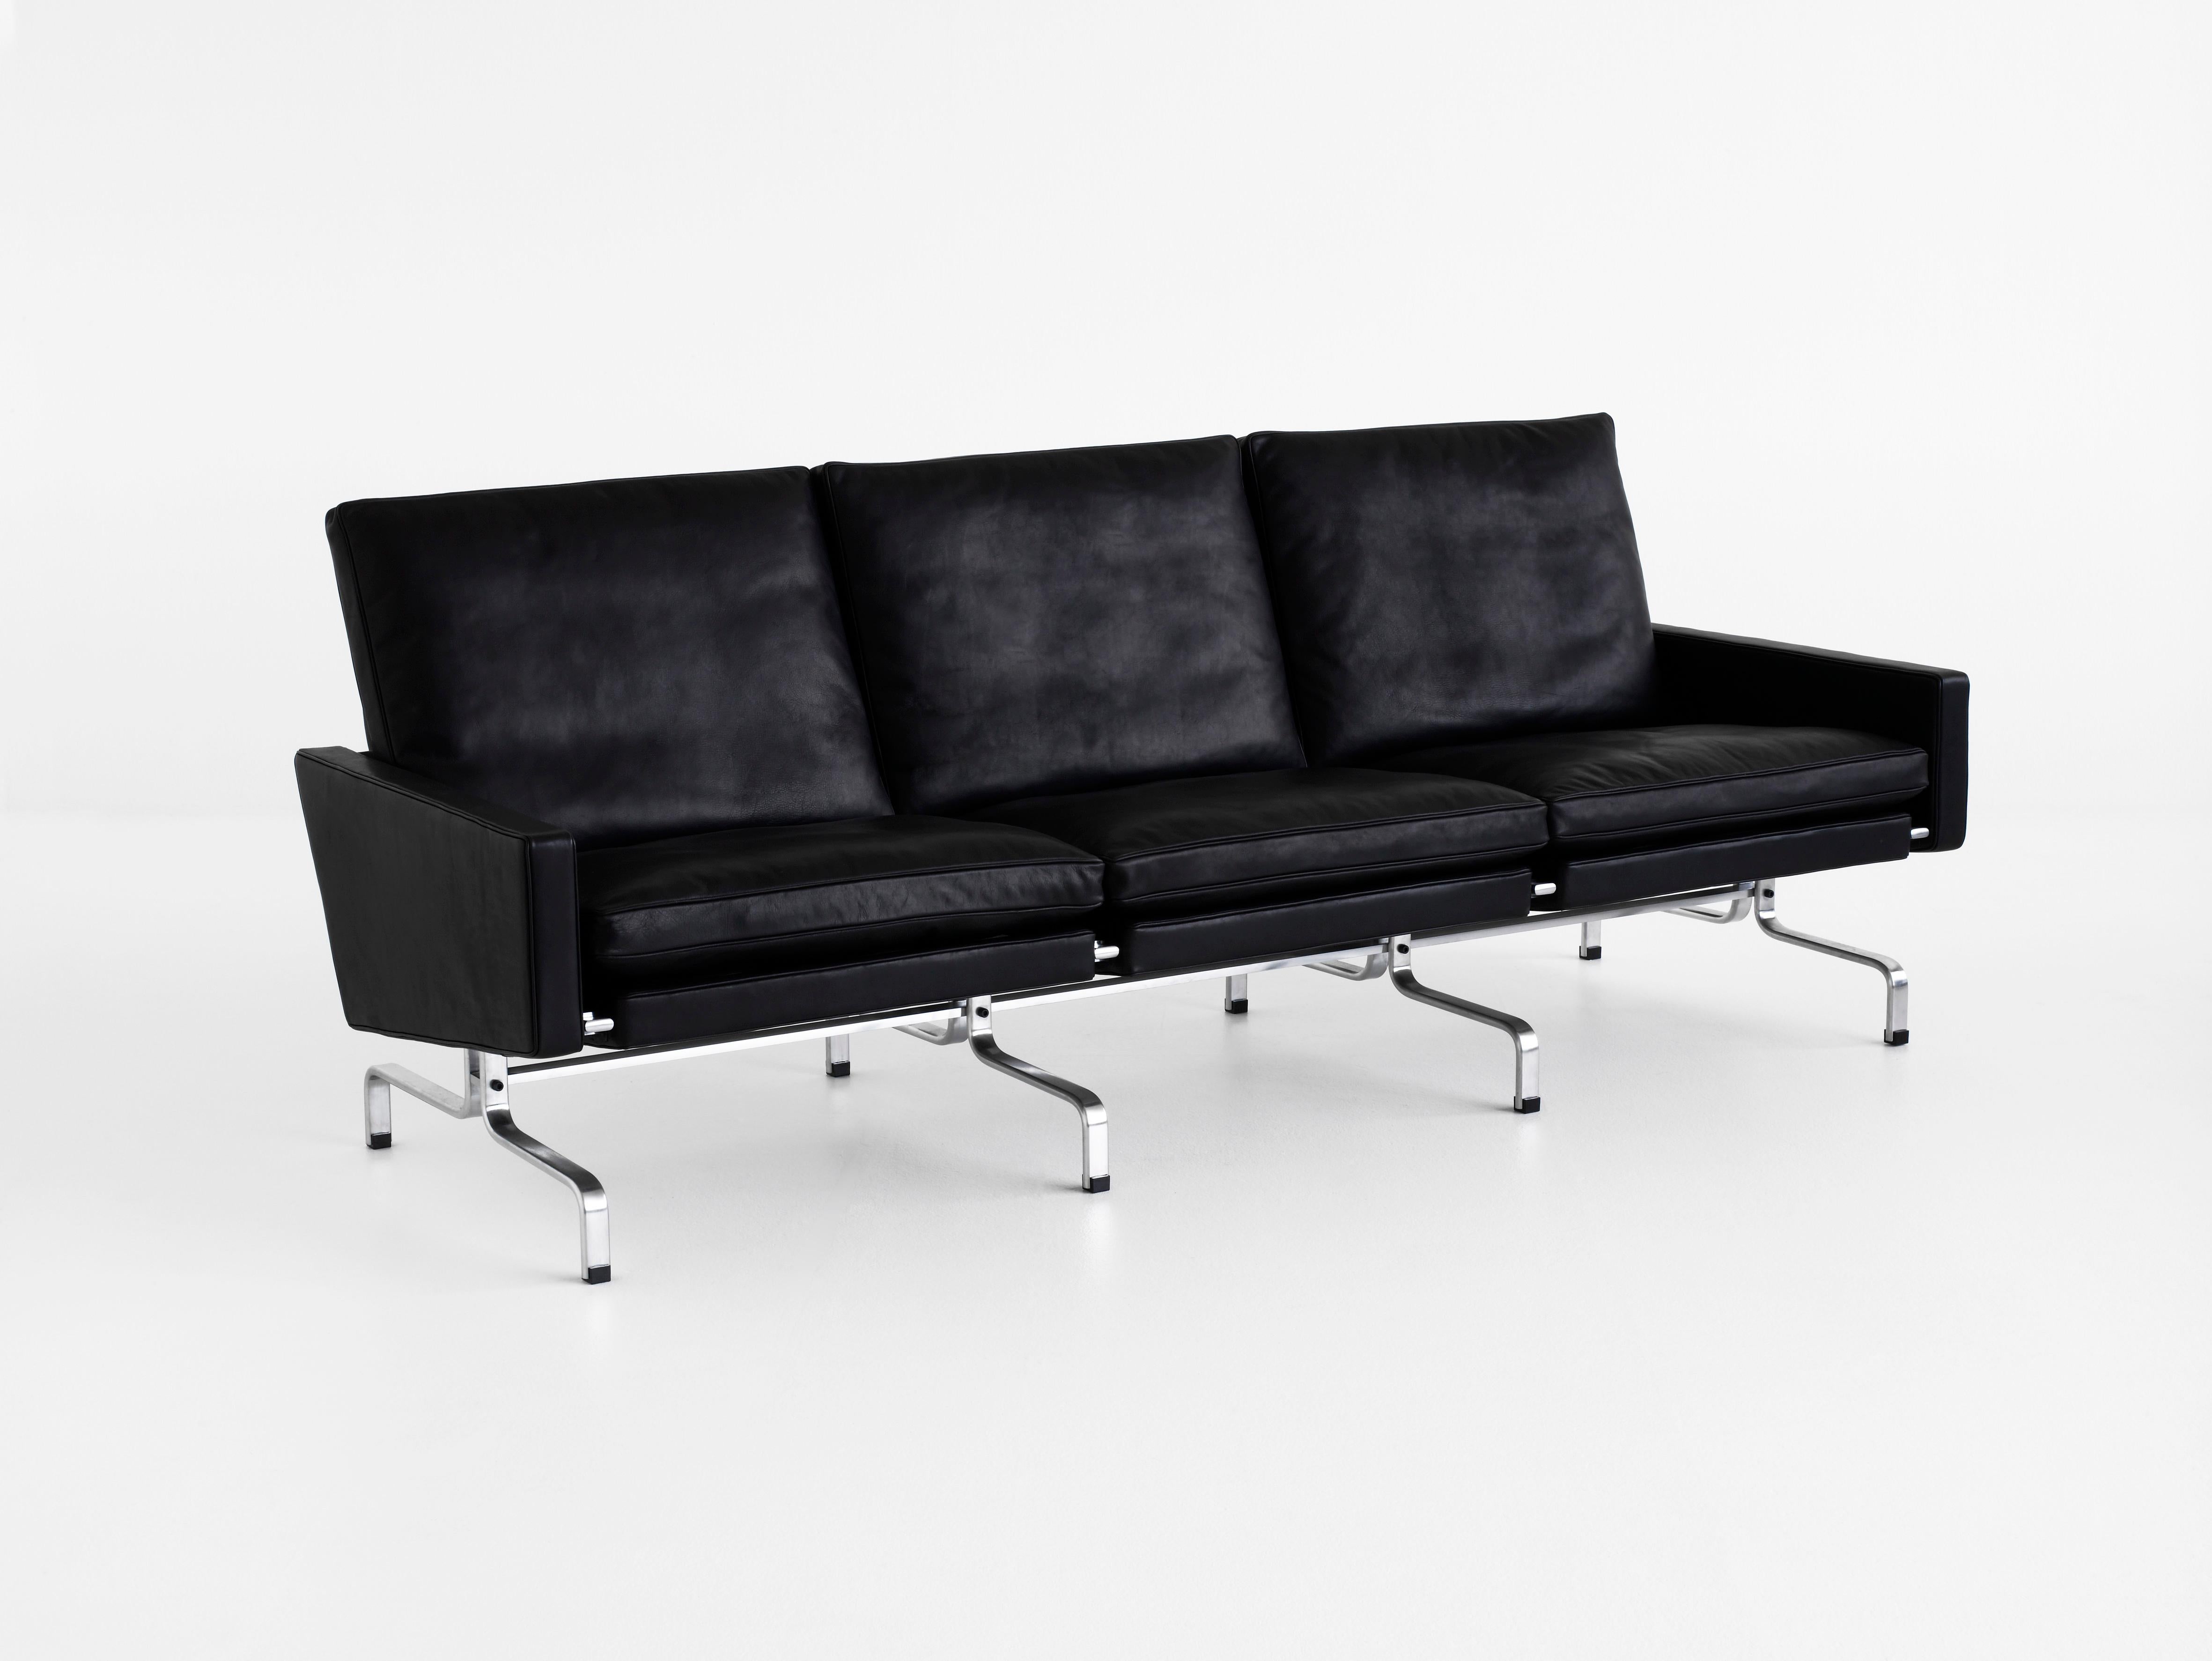 Poul Kjærholm 'PK31' 3-Seater Sofa for Fritz Hansen in Aura Leather  In New Condition For Sale In Glendale, CA